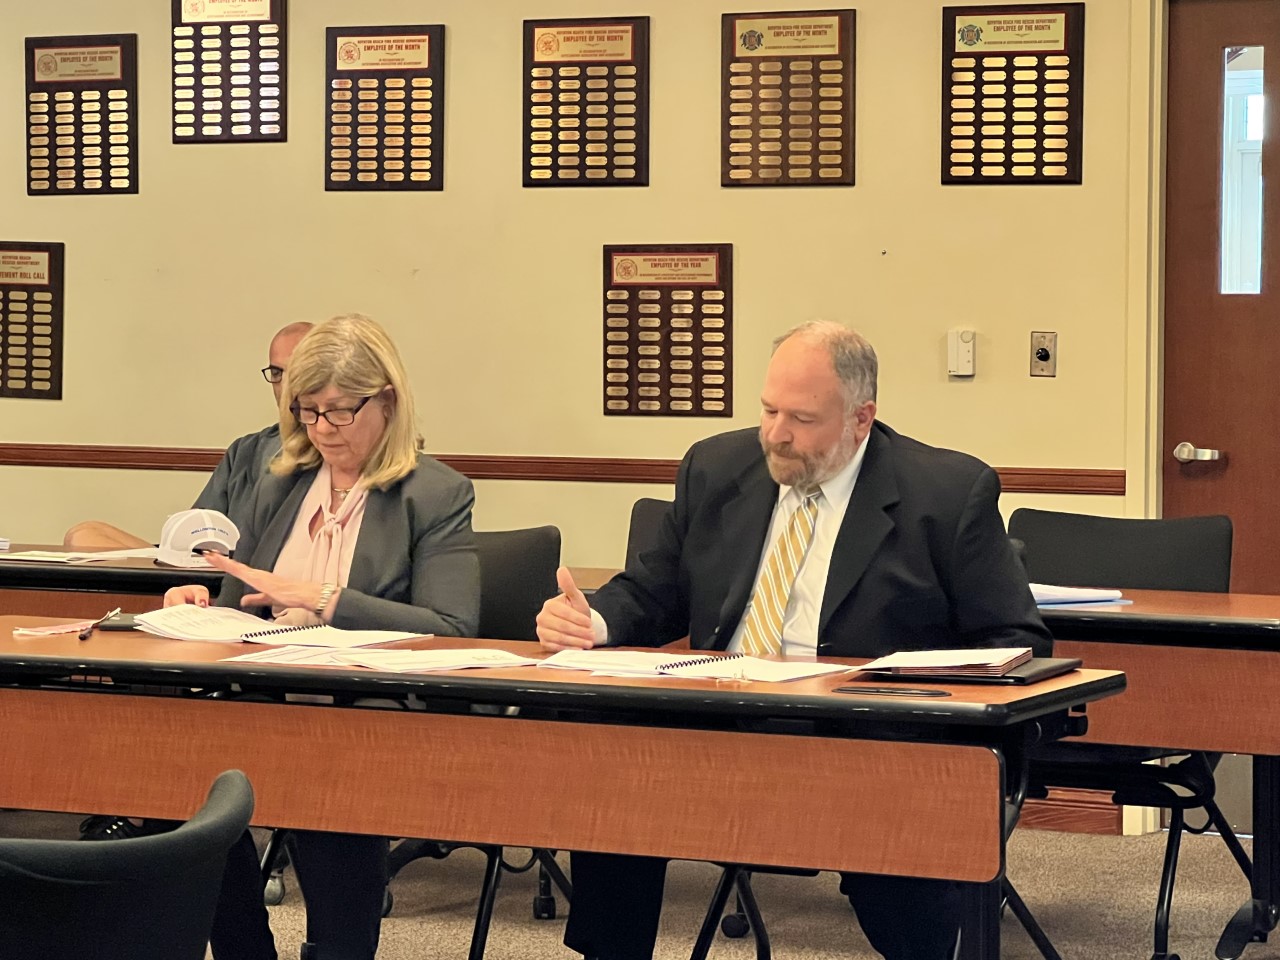 The Board of Trustees received the annual financial statements from its independent auditor. Pictured here are:  Mr. Chuck Landers and Ms. Jeanine Bittinger of Saltmarsh, Cleaveland & Gund who provided the report to the Board. This report and other disclosures may be viewed by clicking the following link:  <a href='http://bbffp.org/modules/stateDocs/index.asp' class='lnkSlider' target='_blank'>Disclosure Page</a>. Scroll to the bottom of the page and click the button to view the Reports.